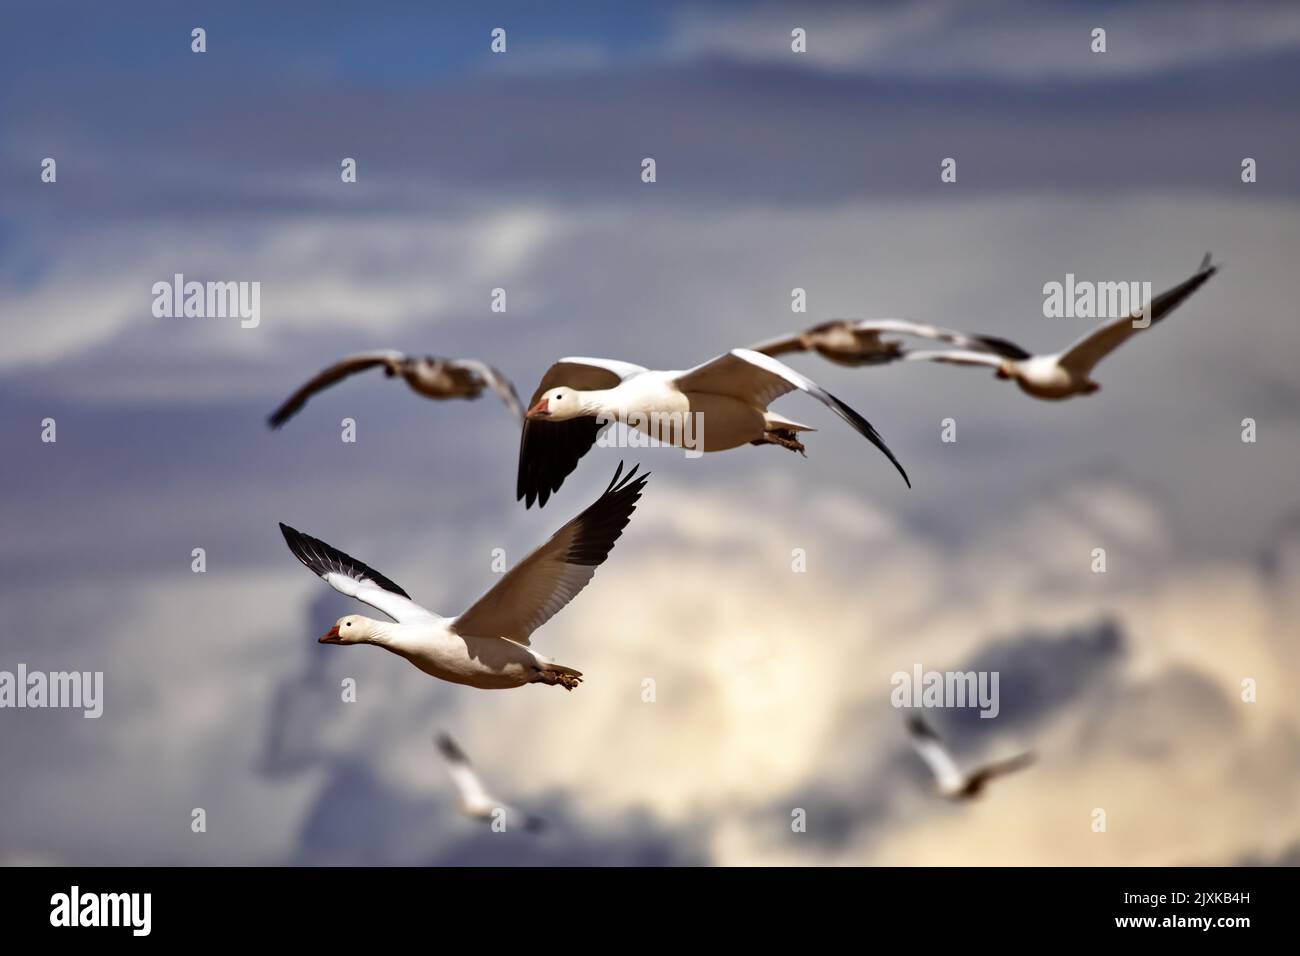 Natural beauty of birds seen in selective focus on pair of snow geese in flight with others in bokeh across New Mexico winter sky Stock Photo